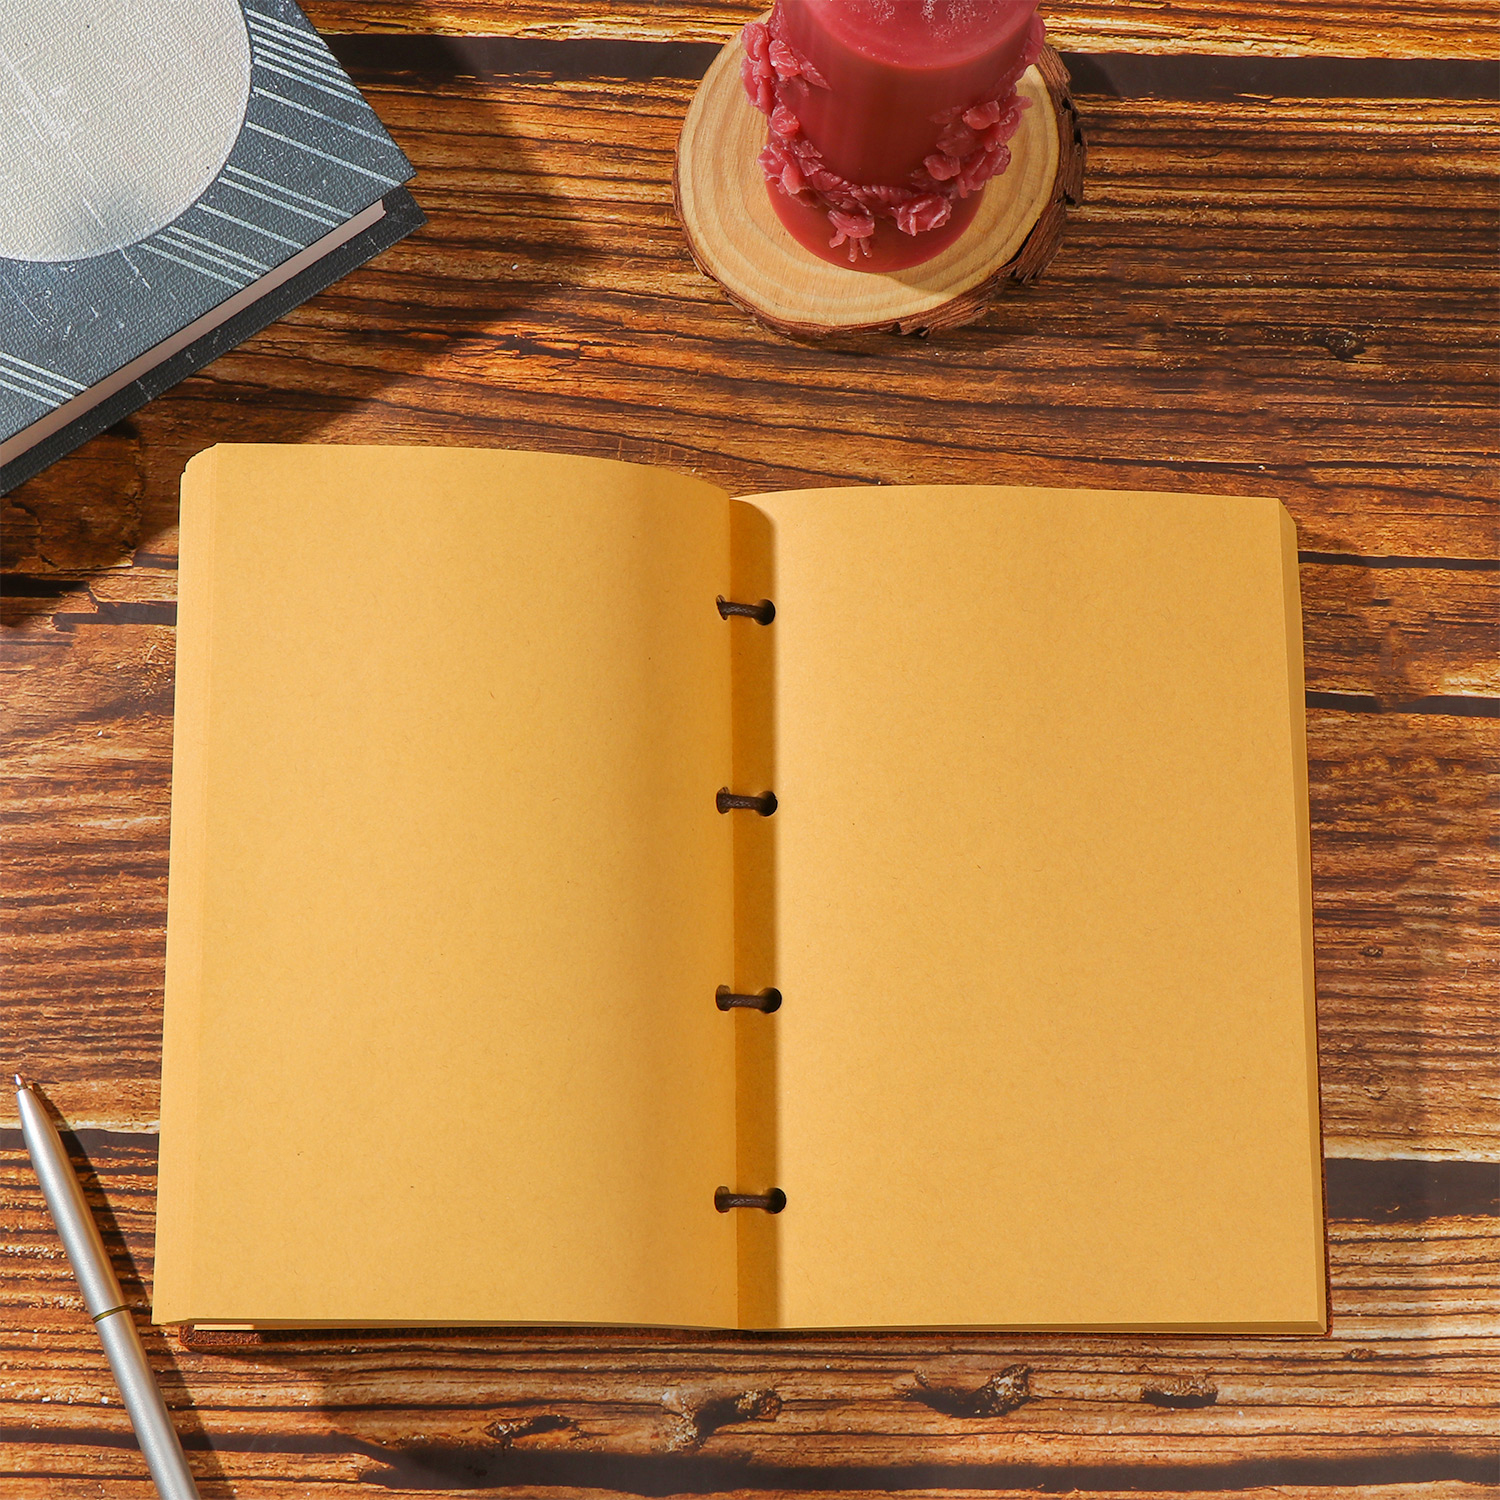 SIKONG Gift Notepad Retro Kraft paper Refillable Journal Leather Portable Travel notebook Notebook